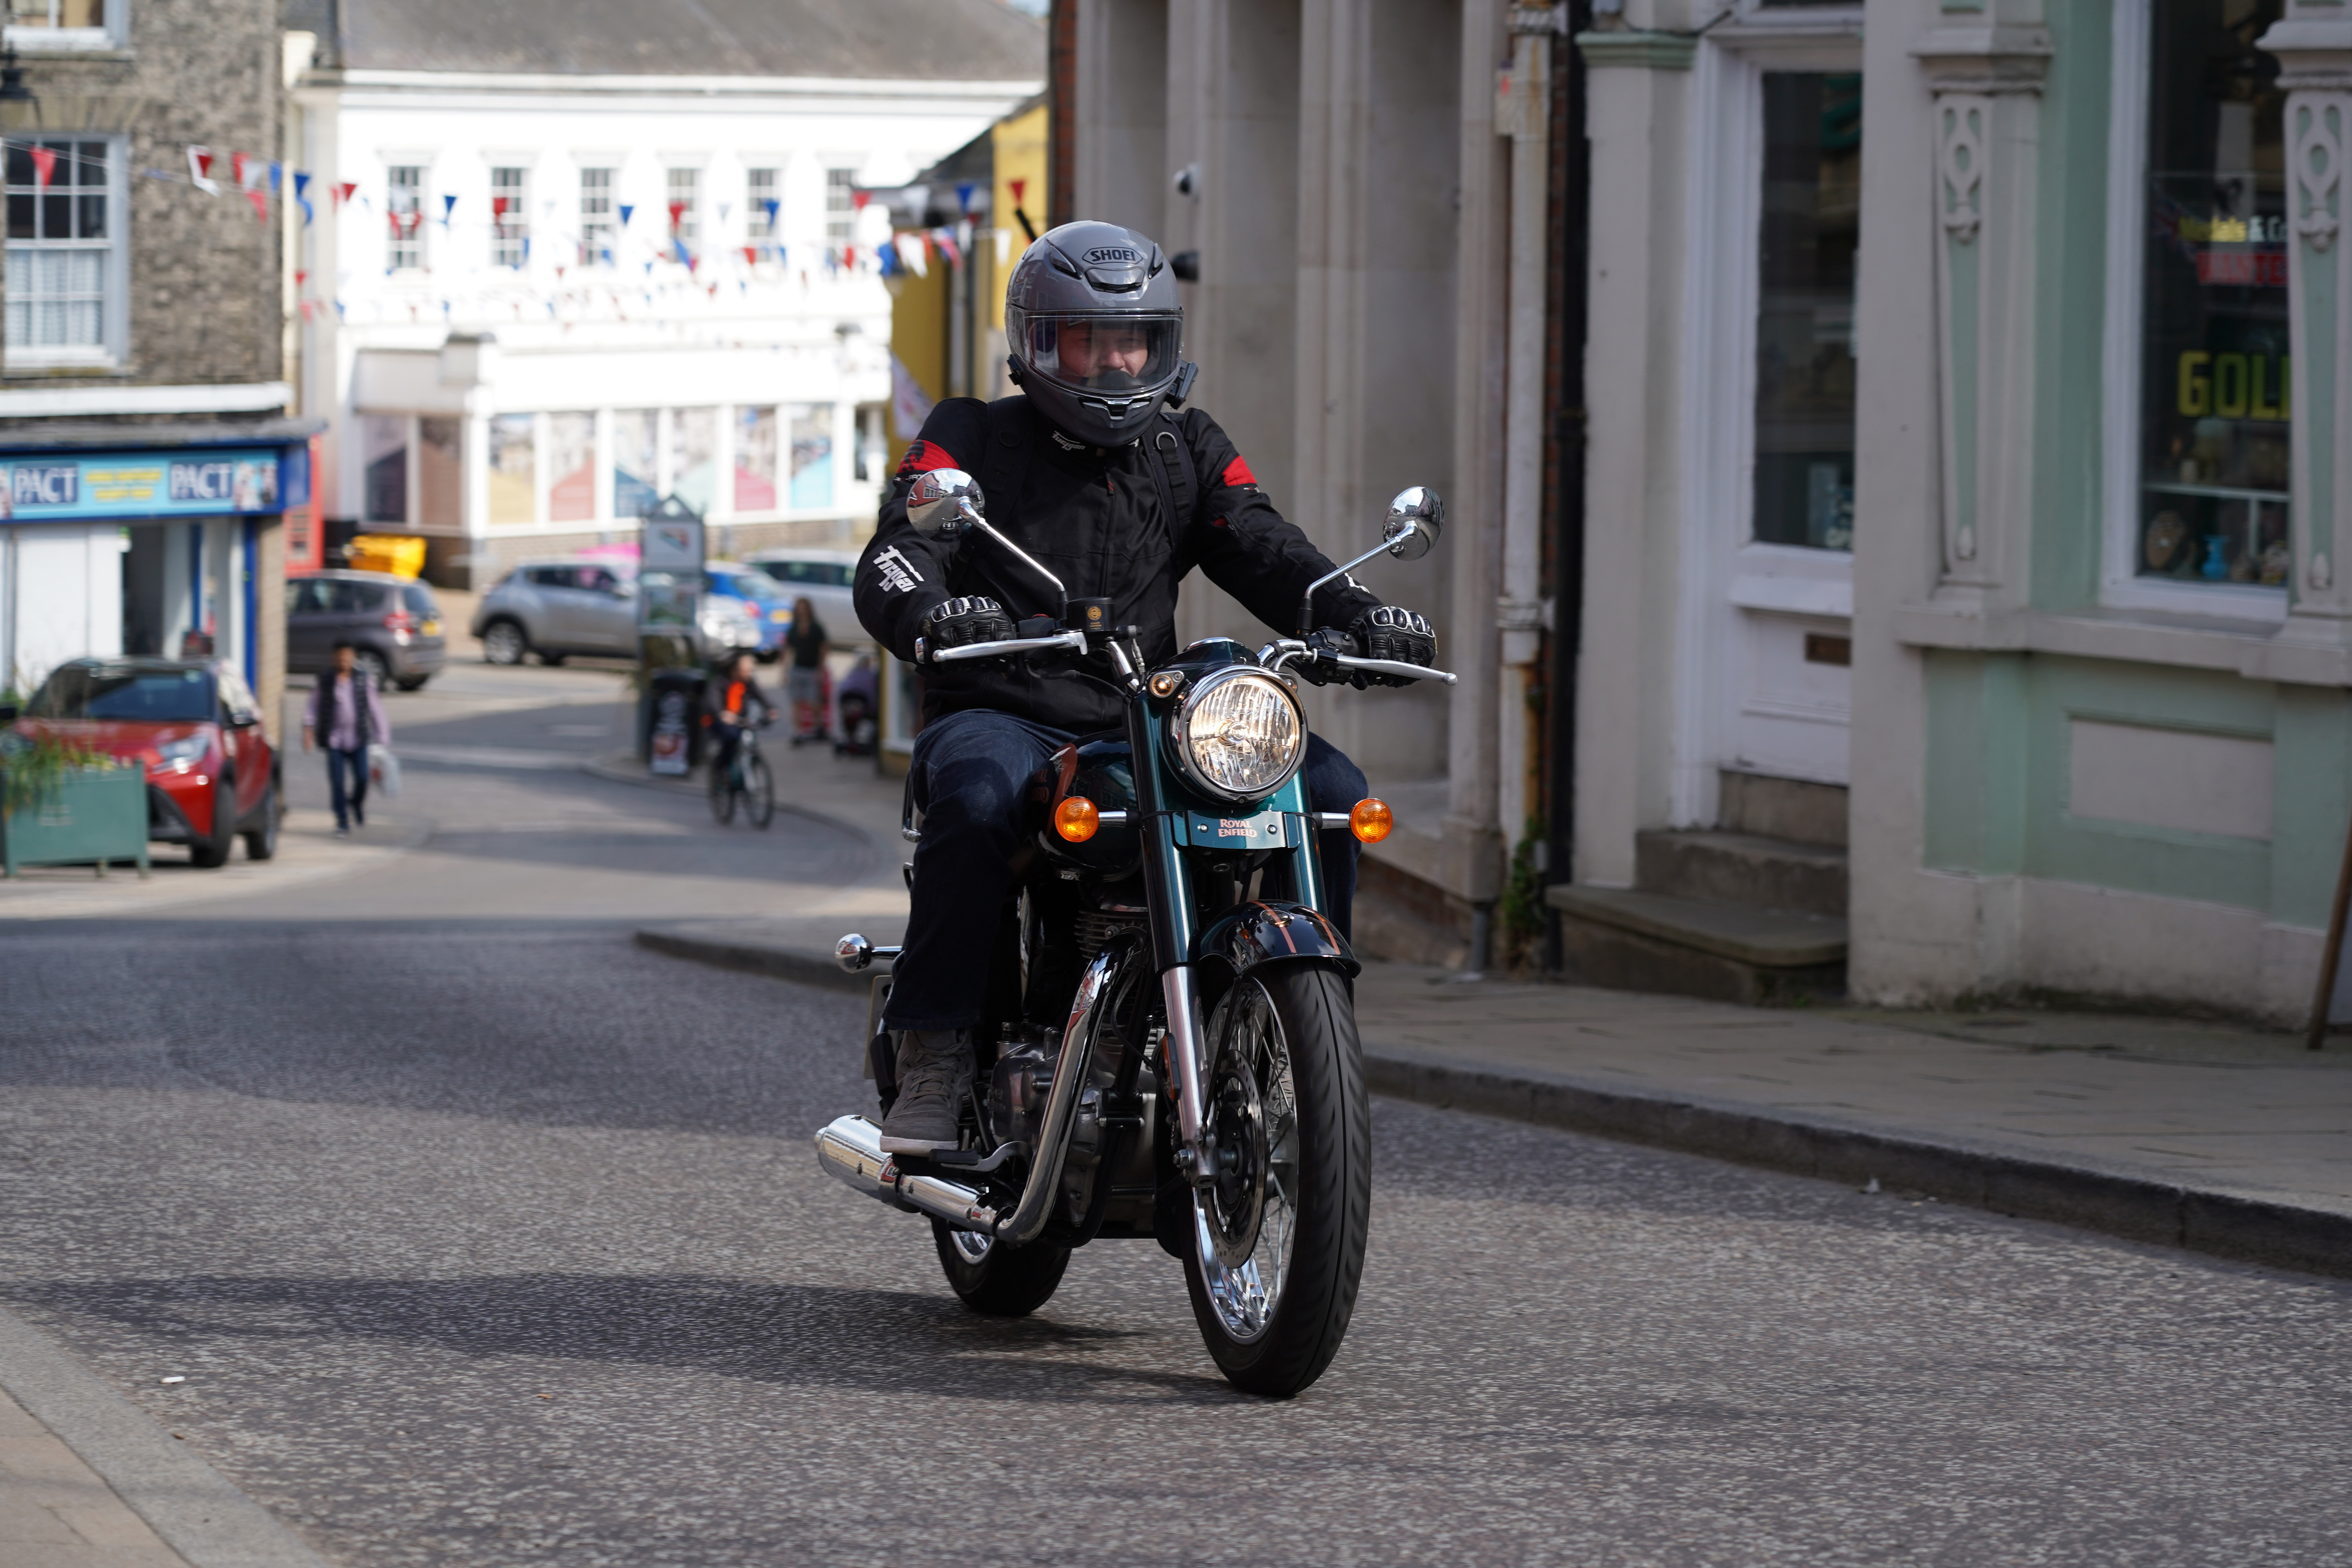 Royal Enfield Classic 350 in UK town